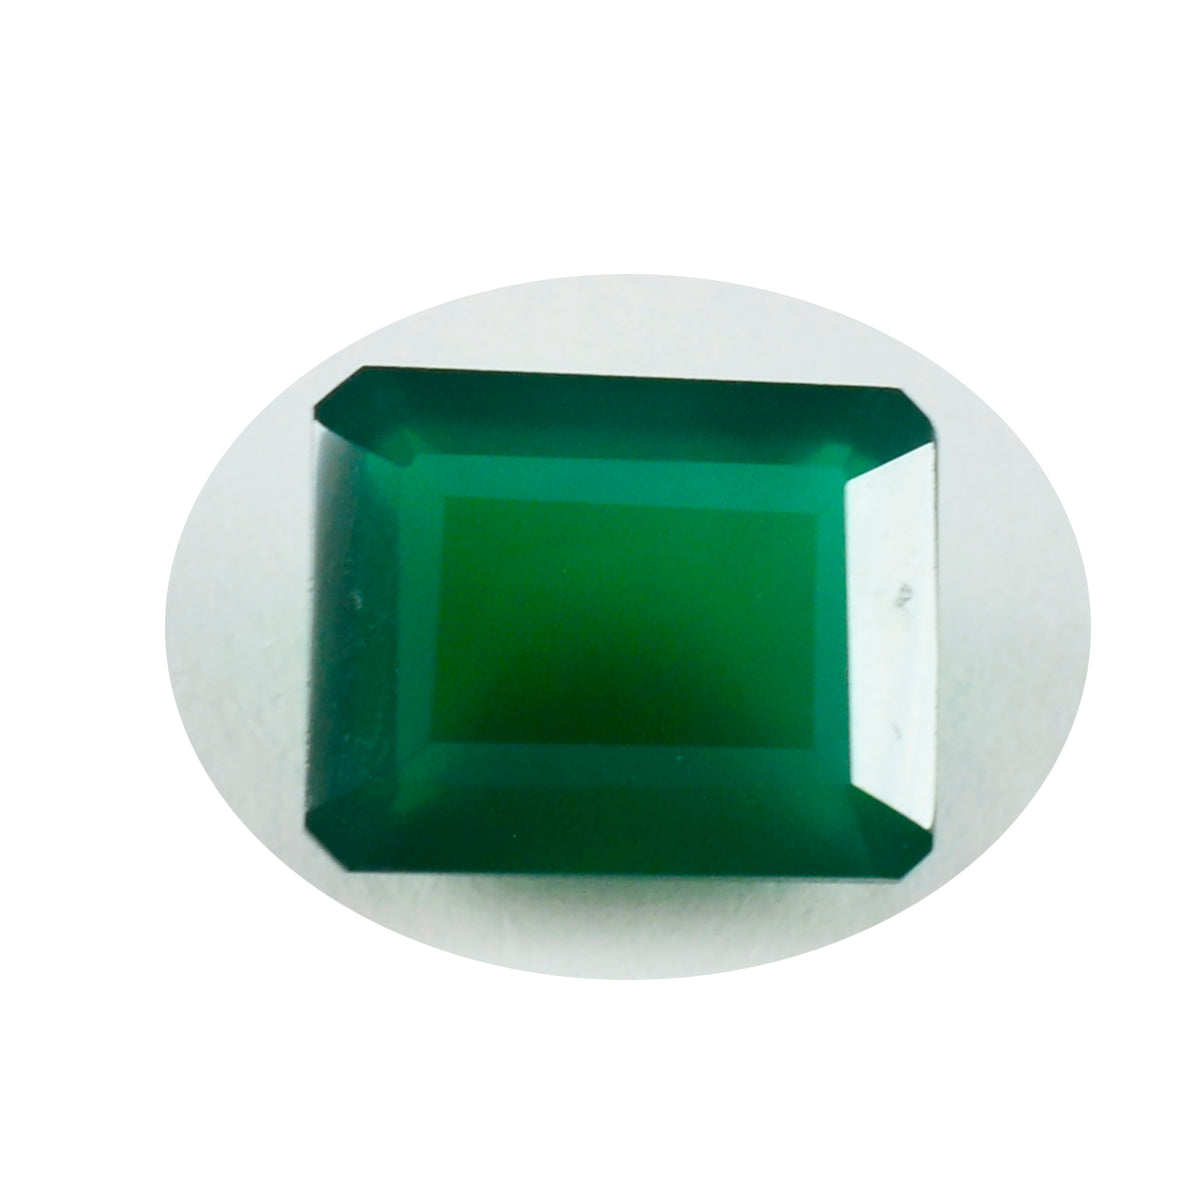 Riyogems 1PC Natural Green Onyx Faceted 12x16 mm Octagon Shape Nice Quality Loose Gems